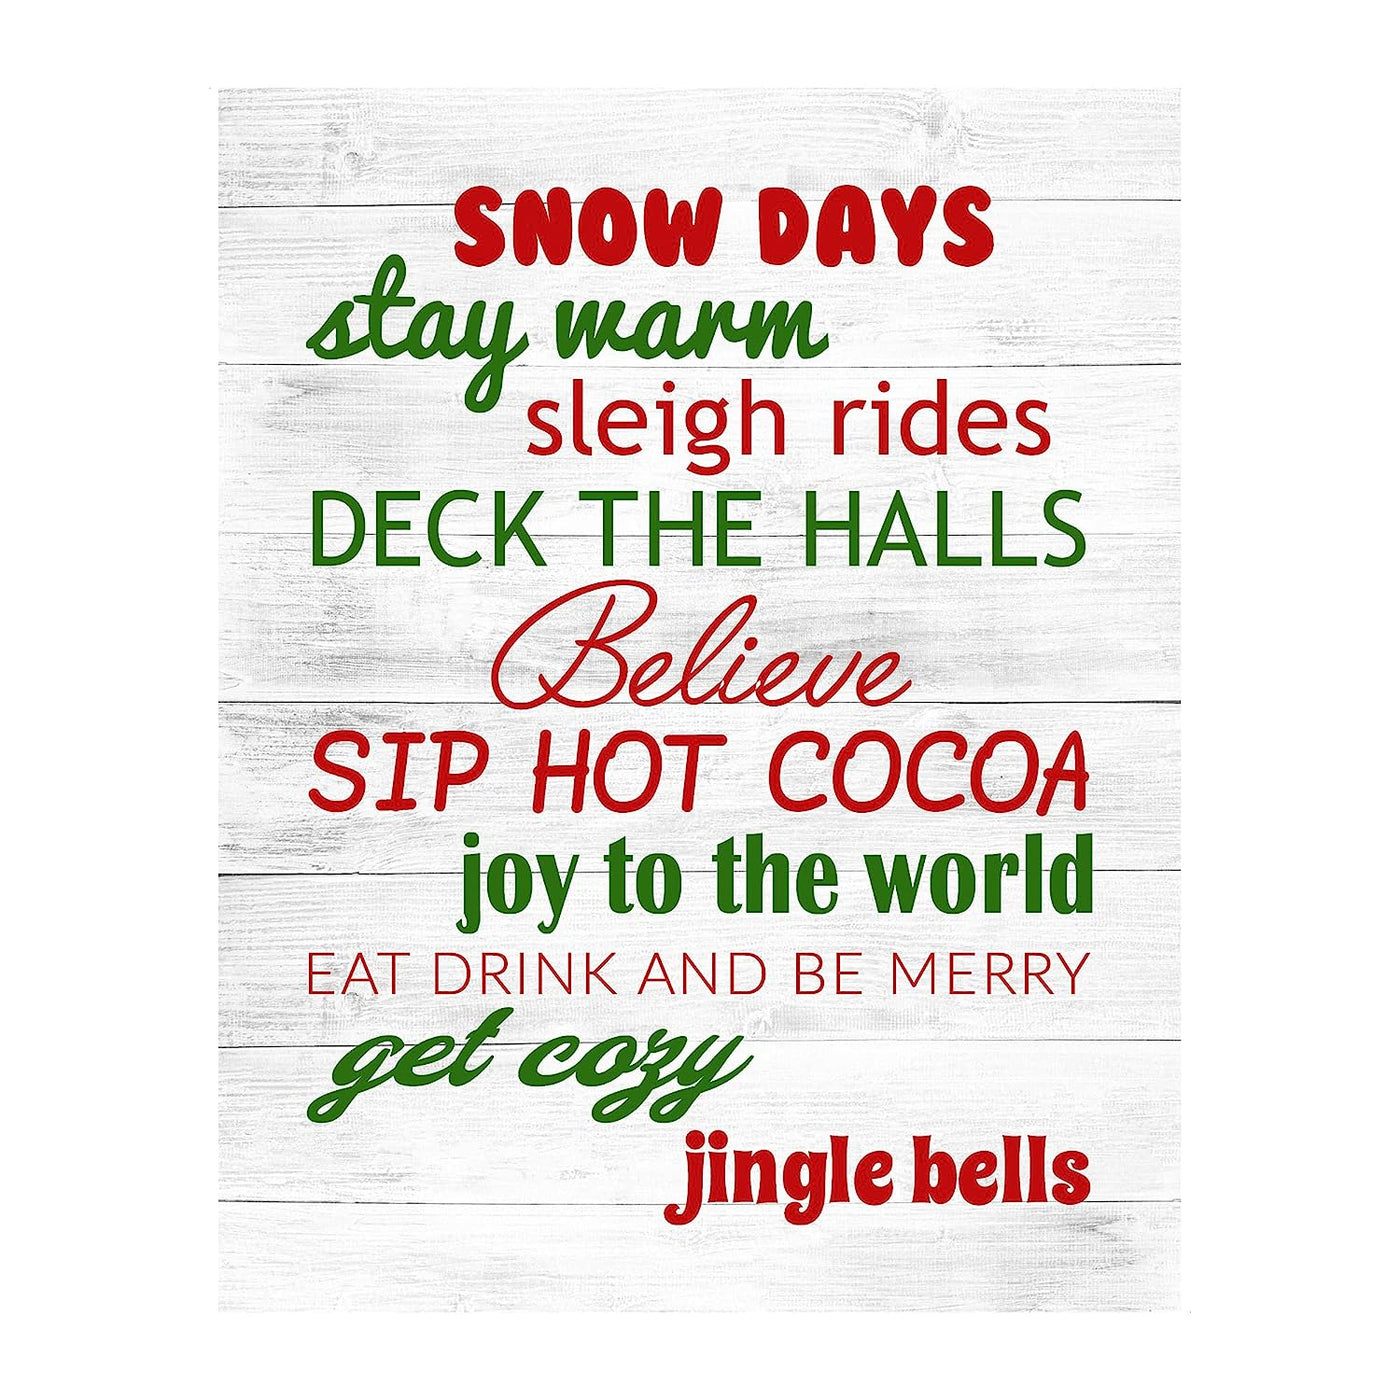 Snow Days-Sleigh Rides-Deck the Halls Rustic Holiday Sign-11 x 14" Festive Christmas Wall Art Print w/Replica Wood Design-Ready to Frame. Typographic Home-Farmhouse-Welcome Decor. Printed on Paper.